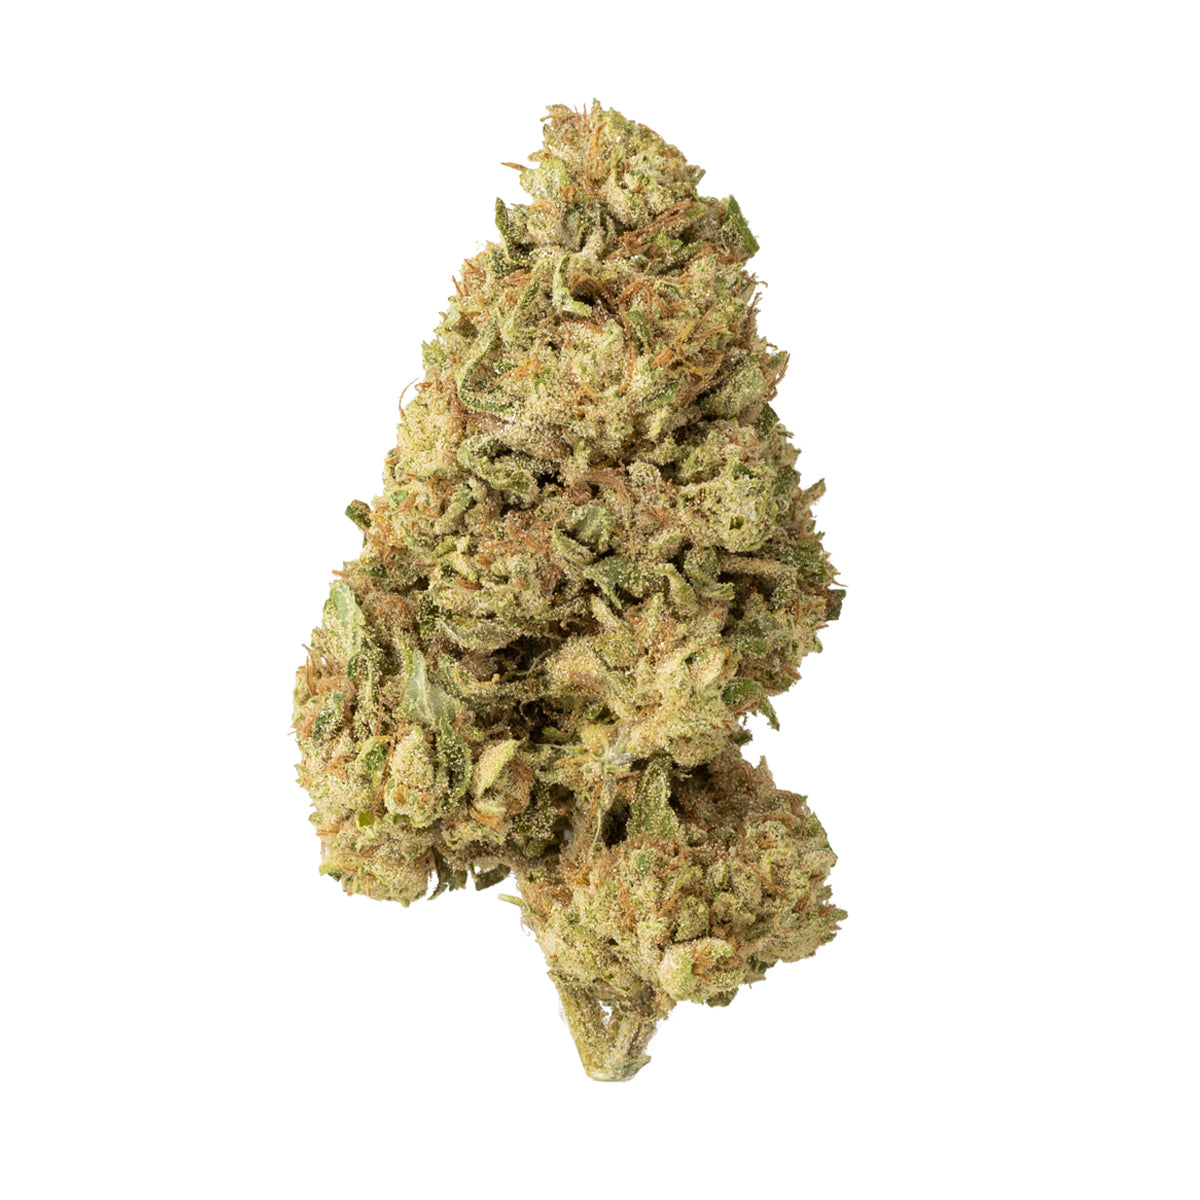 White CBG Sativa Hemp Flower - White CBG is&nbsp;a Sativa strain that works perfectly for both day and nighttime activities. These buds give you a sense of focus, clarity and calm without putting you to sleep. Available in 3.5g size jars.